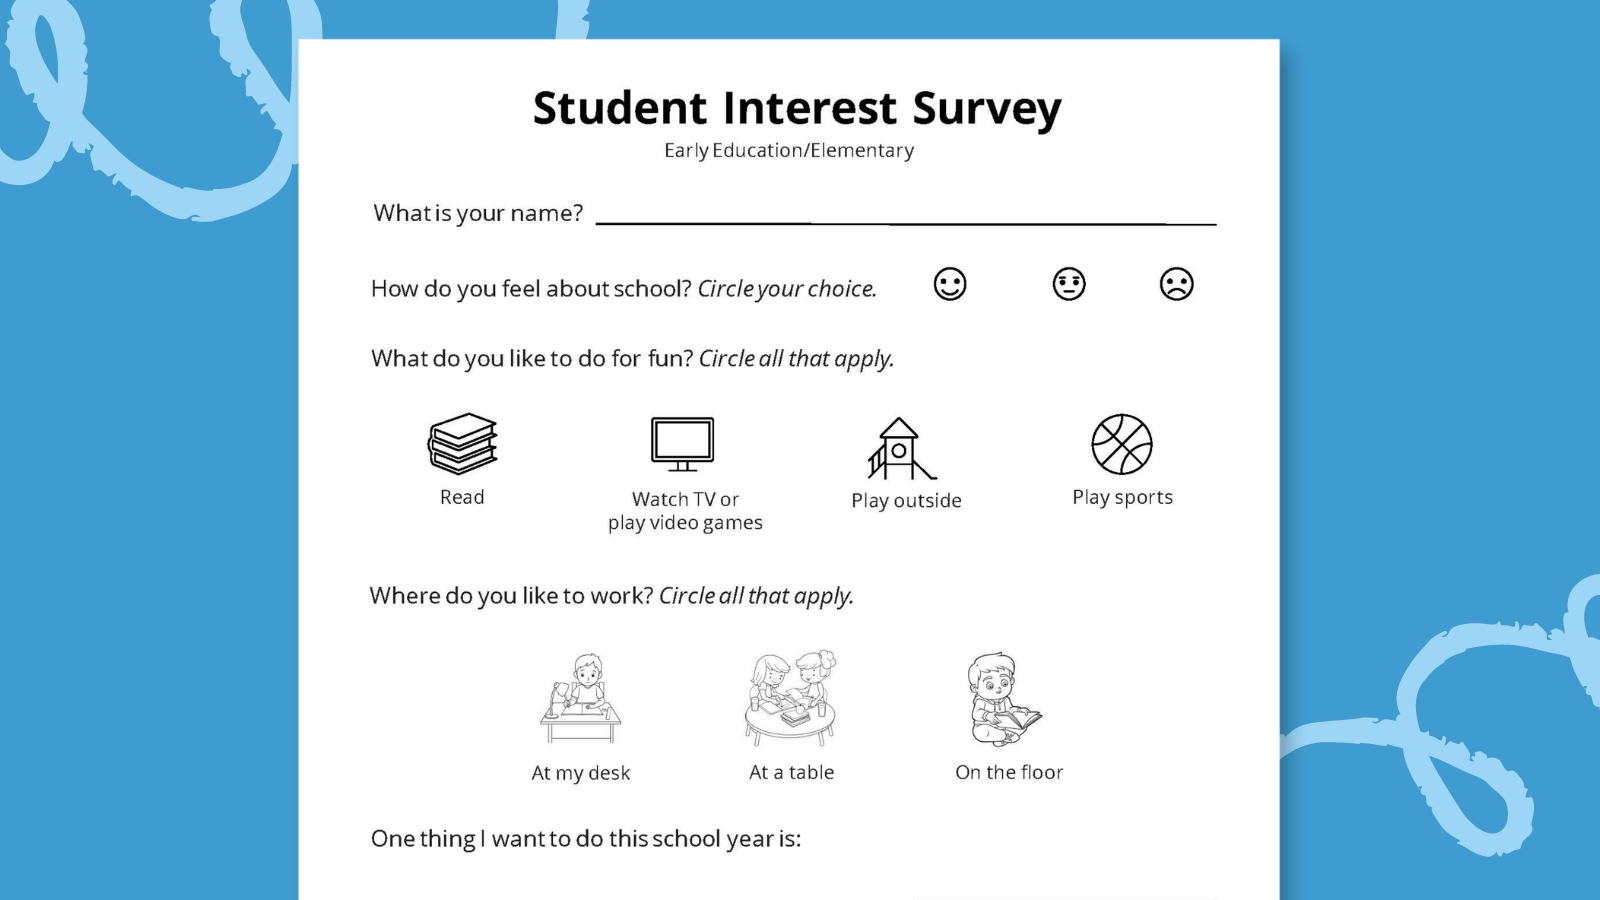 Image of the early elementary student interest survey